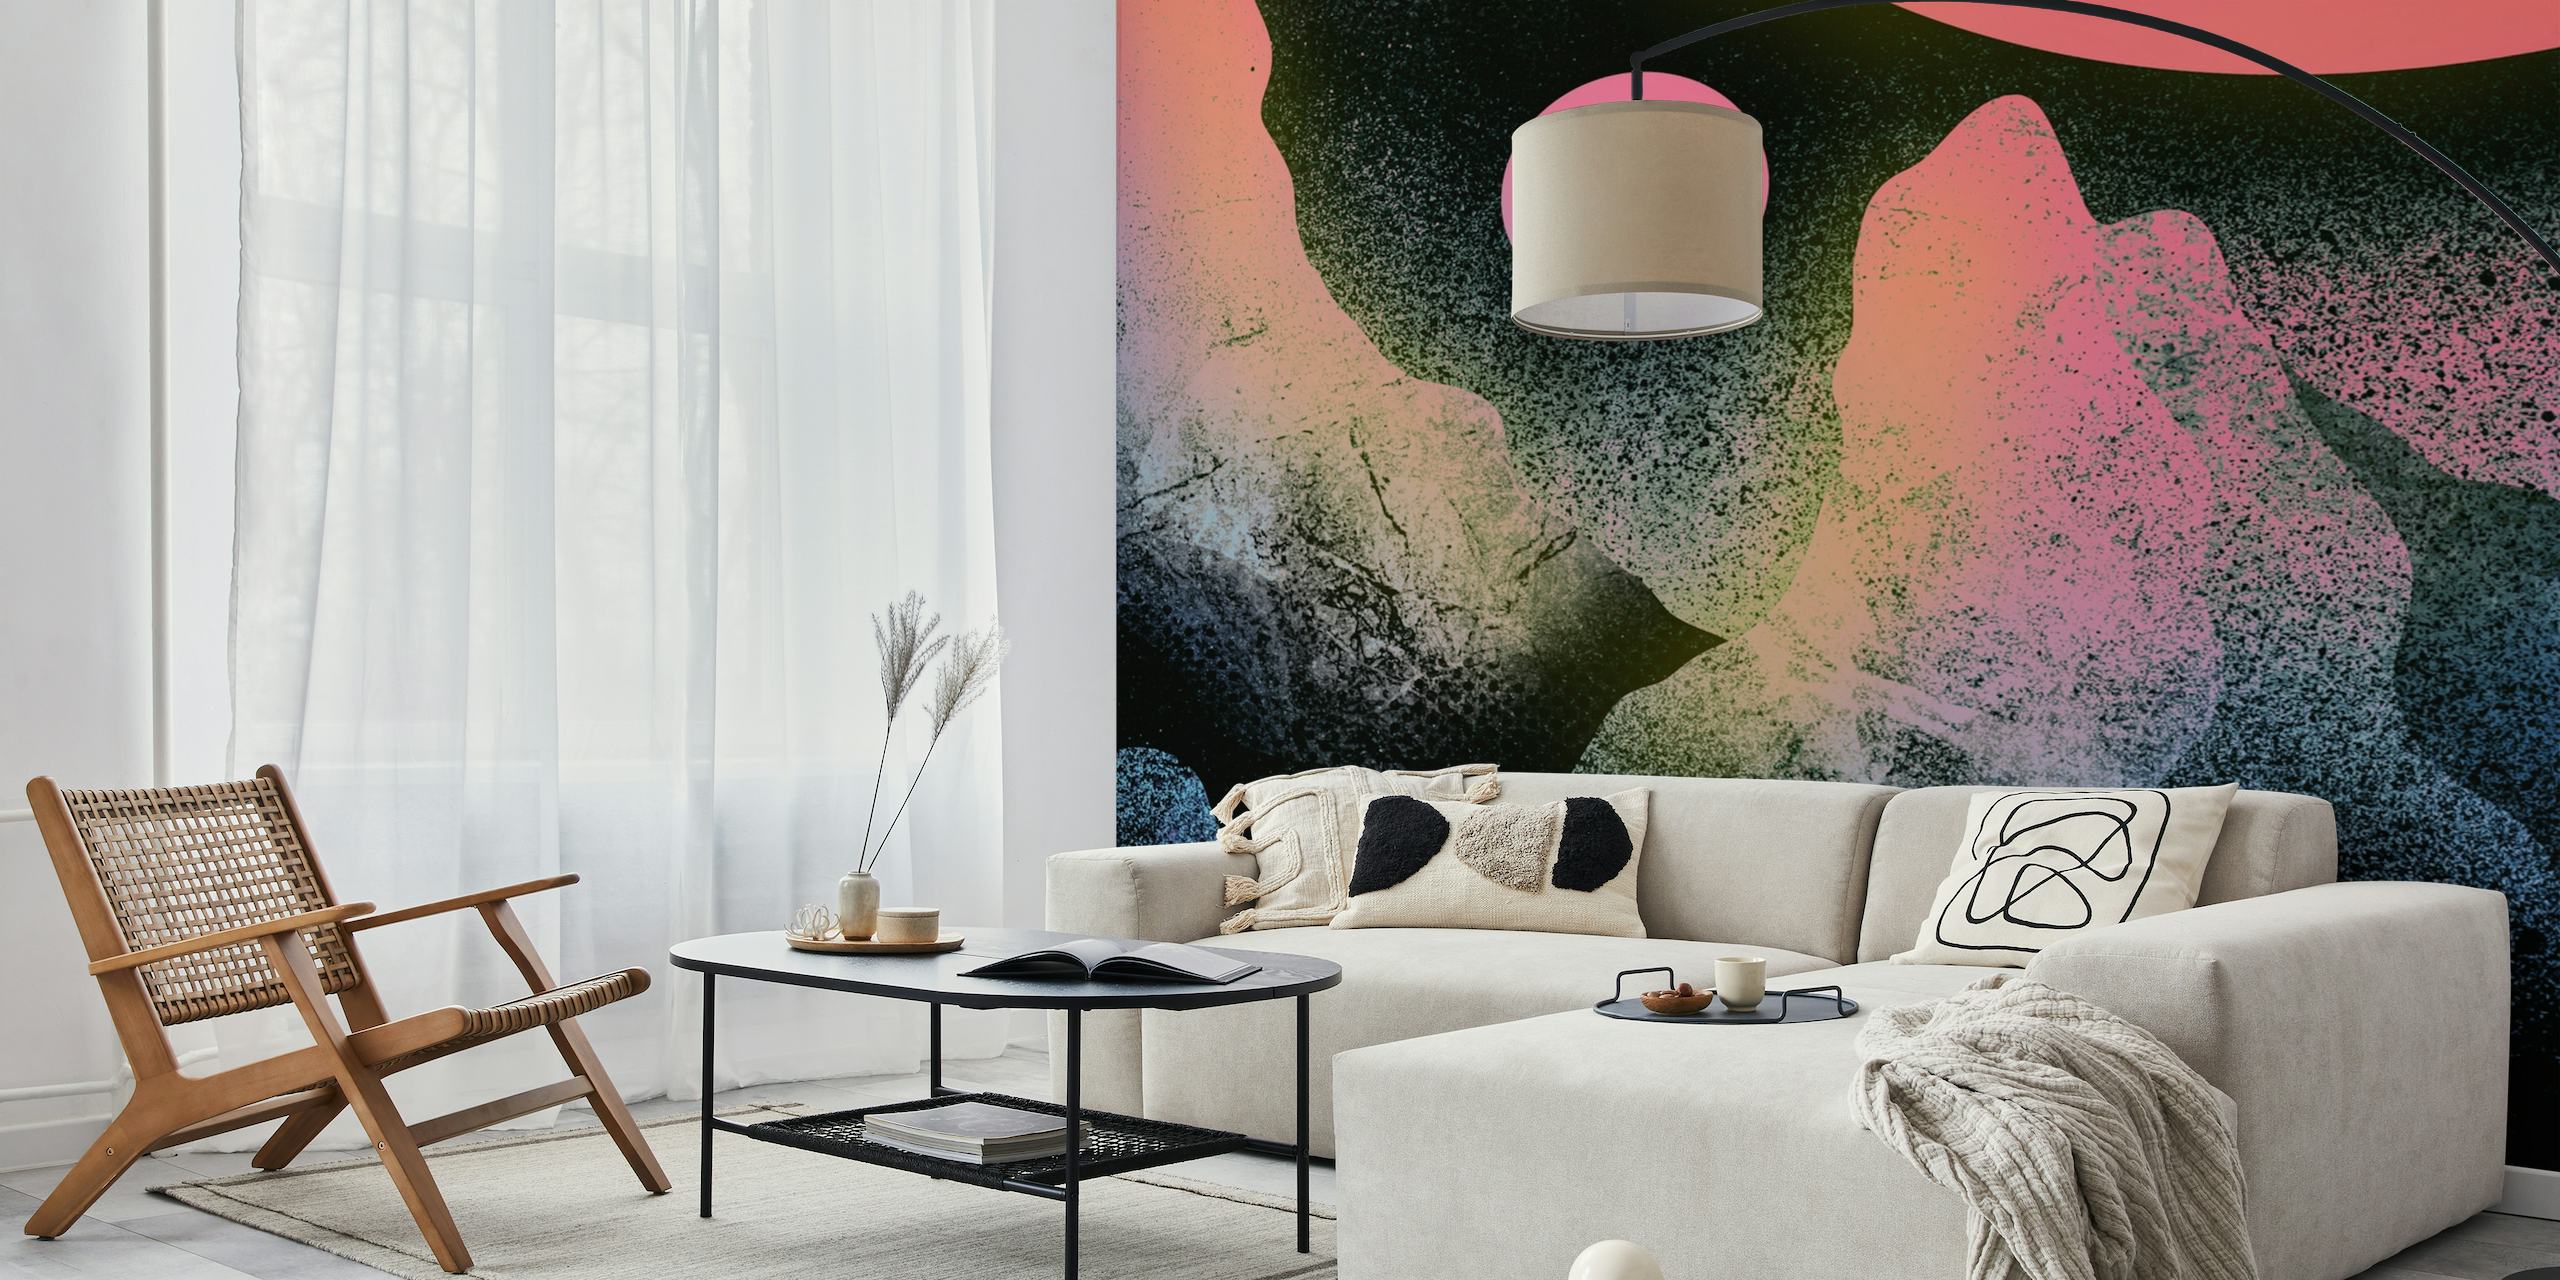 Abstract wall mural with two pink celestial bodies against a dark, textured backdrop